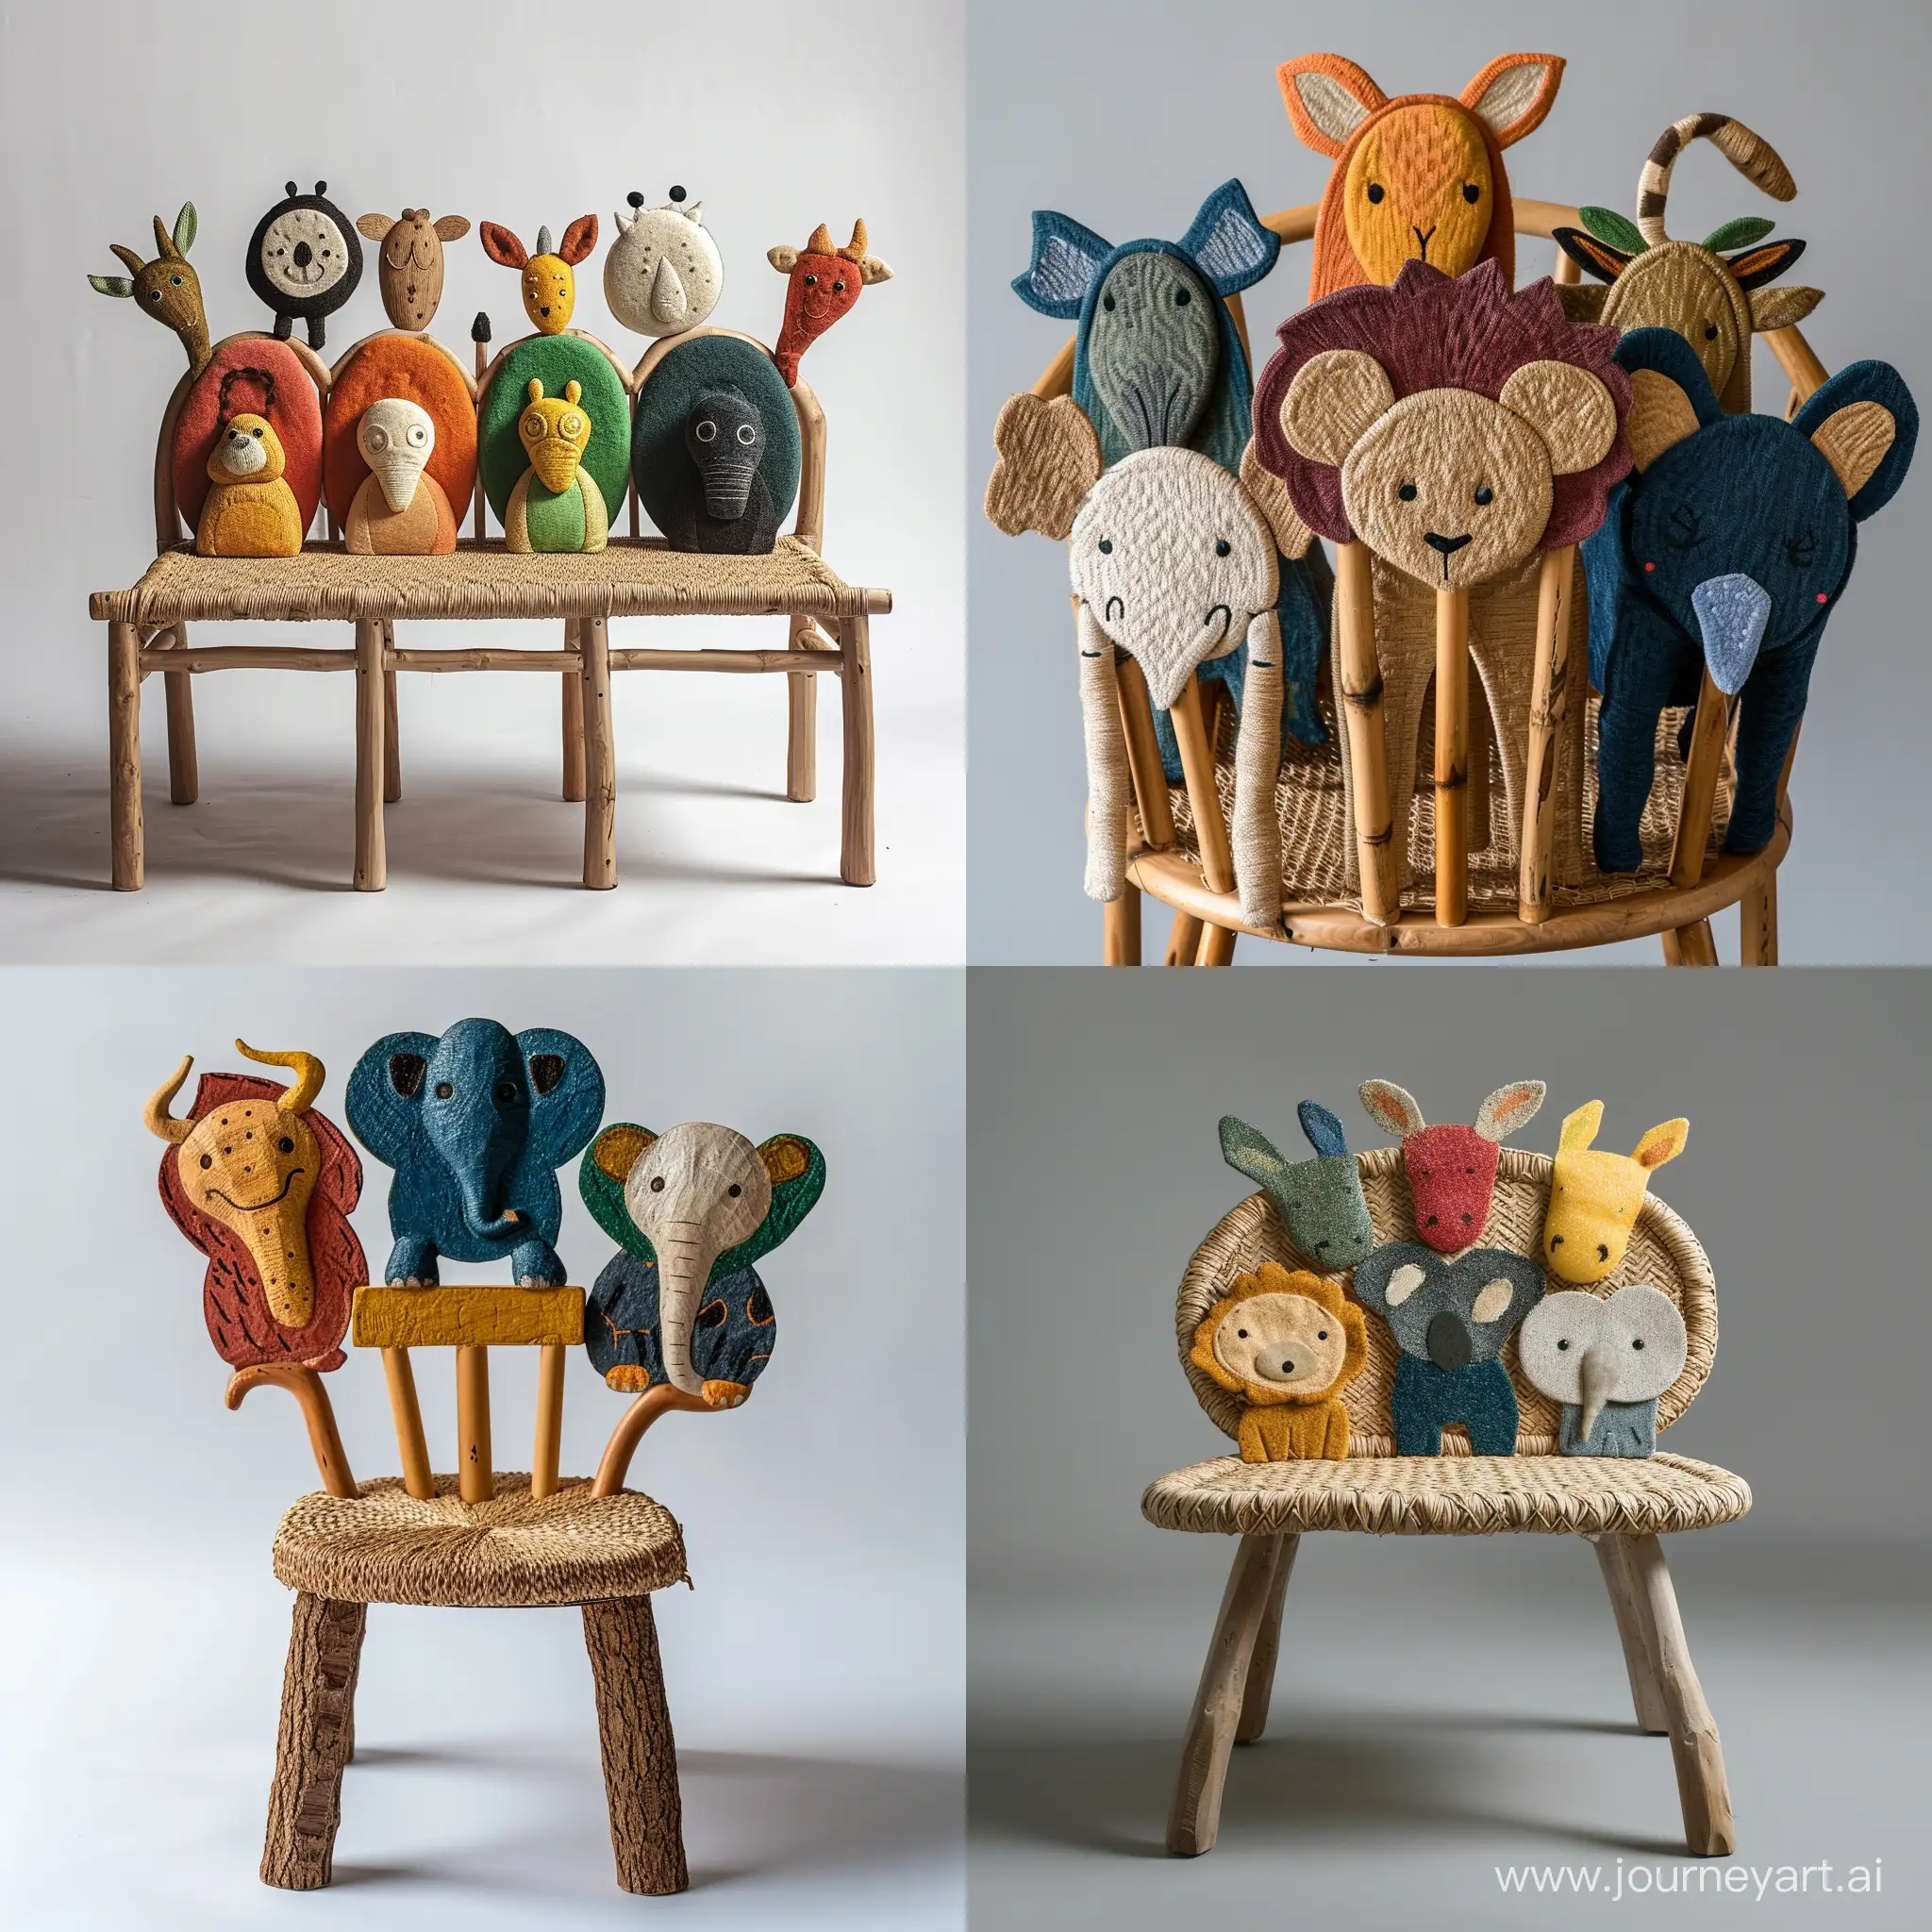 imagine an image of a sturdy children’s chair inspired by cute safari animals, with backrests shaped like different creatures. Use recycled wood for the frame and woven plant fibers for seating areas, depicted in colors representative of the chosen animals. The seat should stand approximately 30cm tall, built to educate about wildlife and ensure durability.realistic style